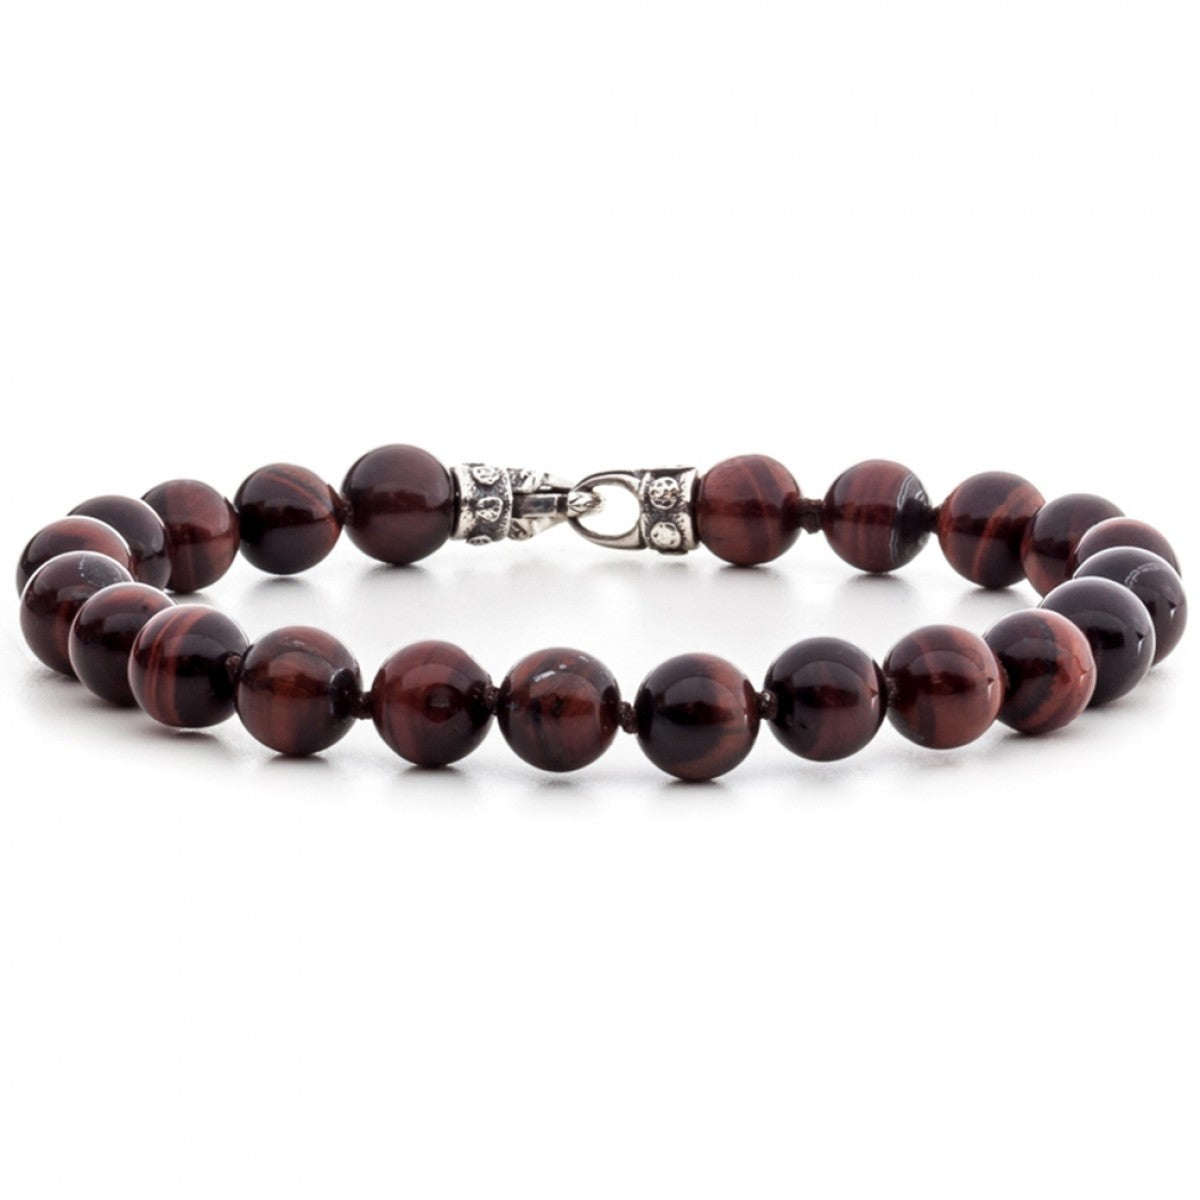 Scott Kay 8mm Tigers Eye Red and Black Bracelet with Sterling Silver Clasp, 8.5 Inches